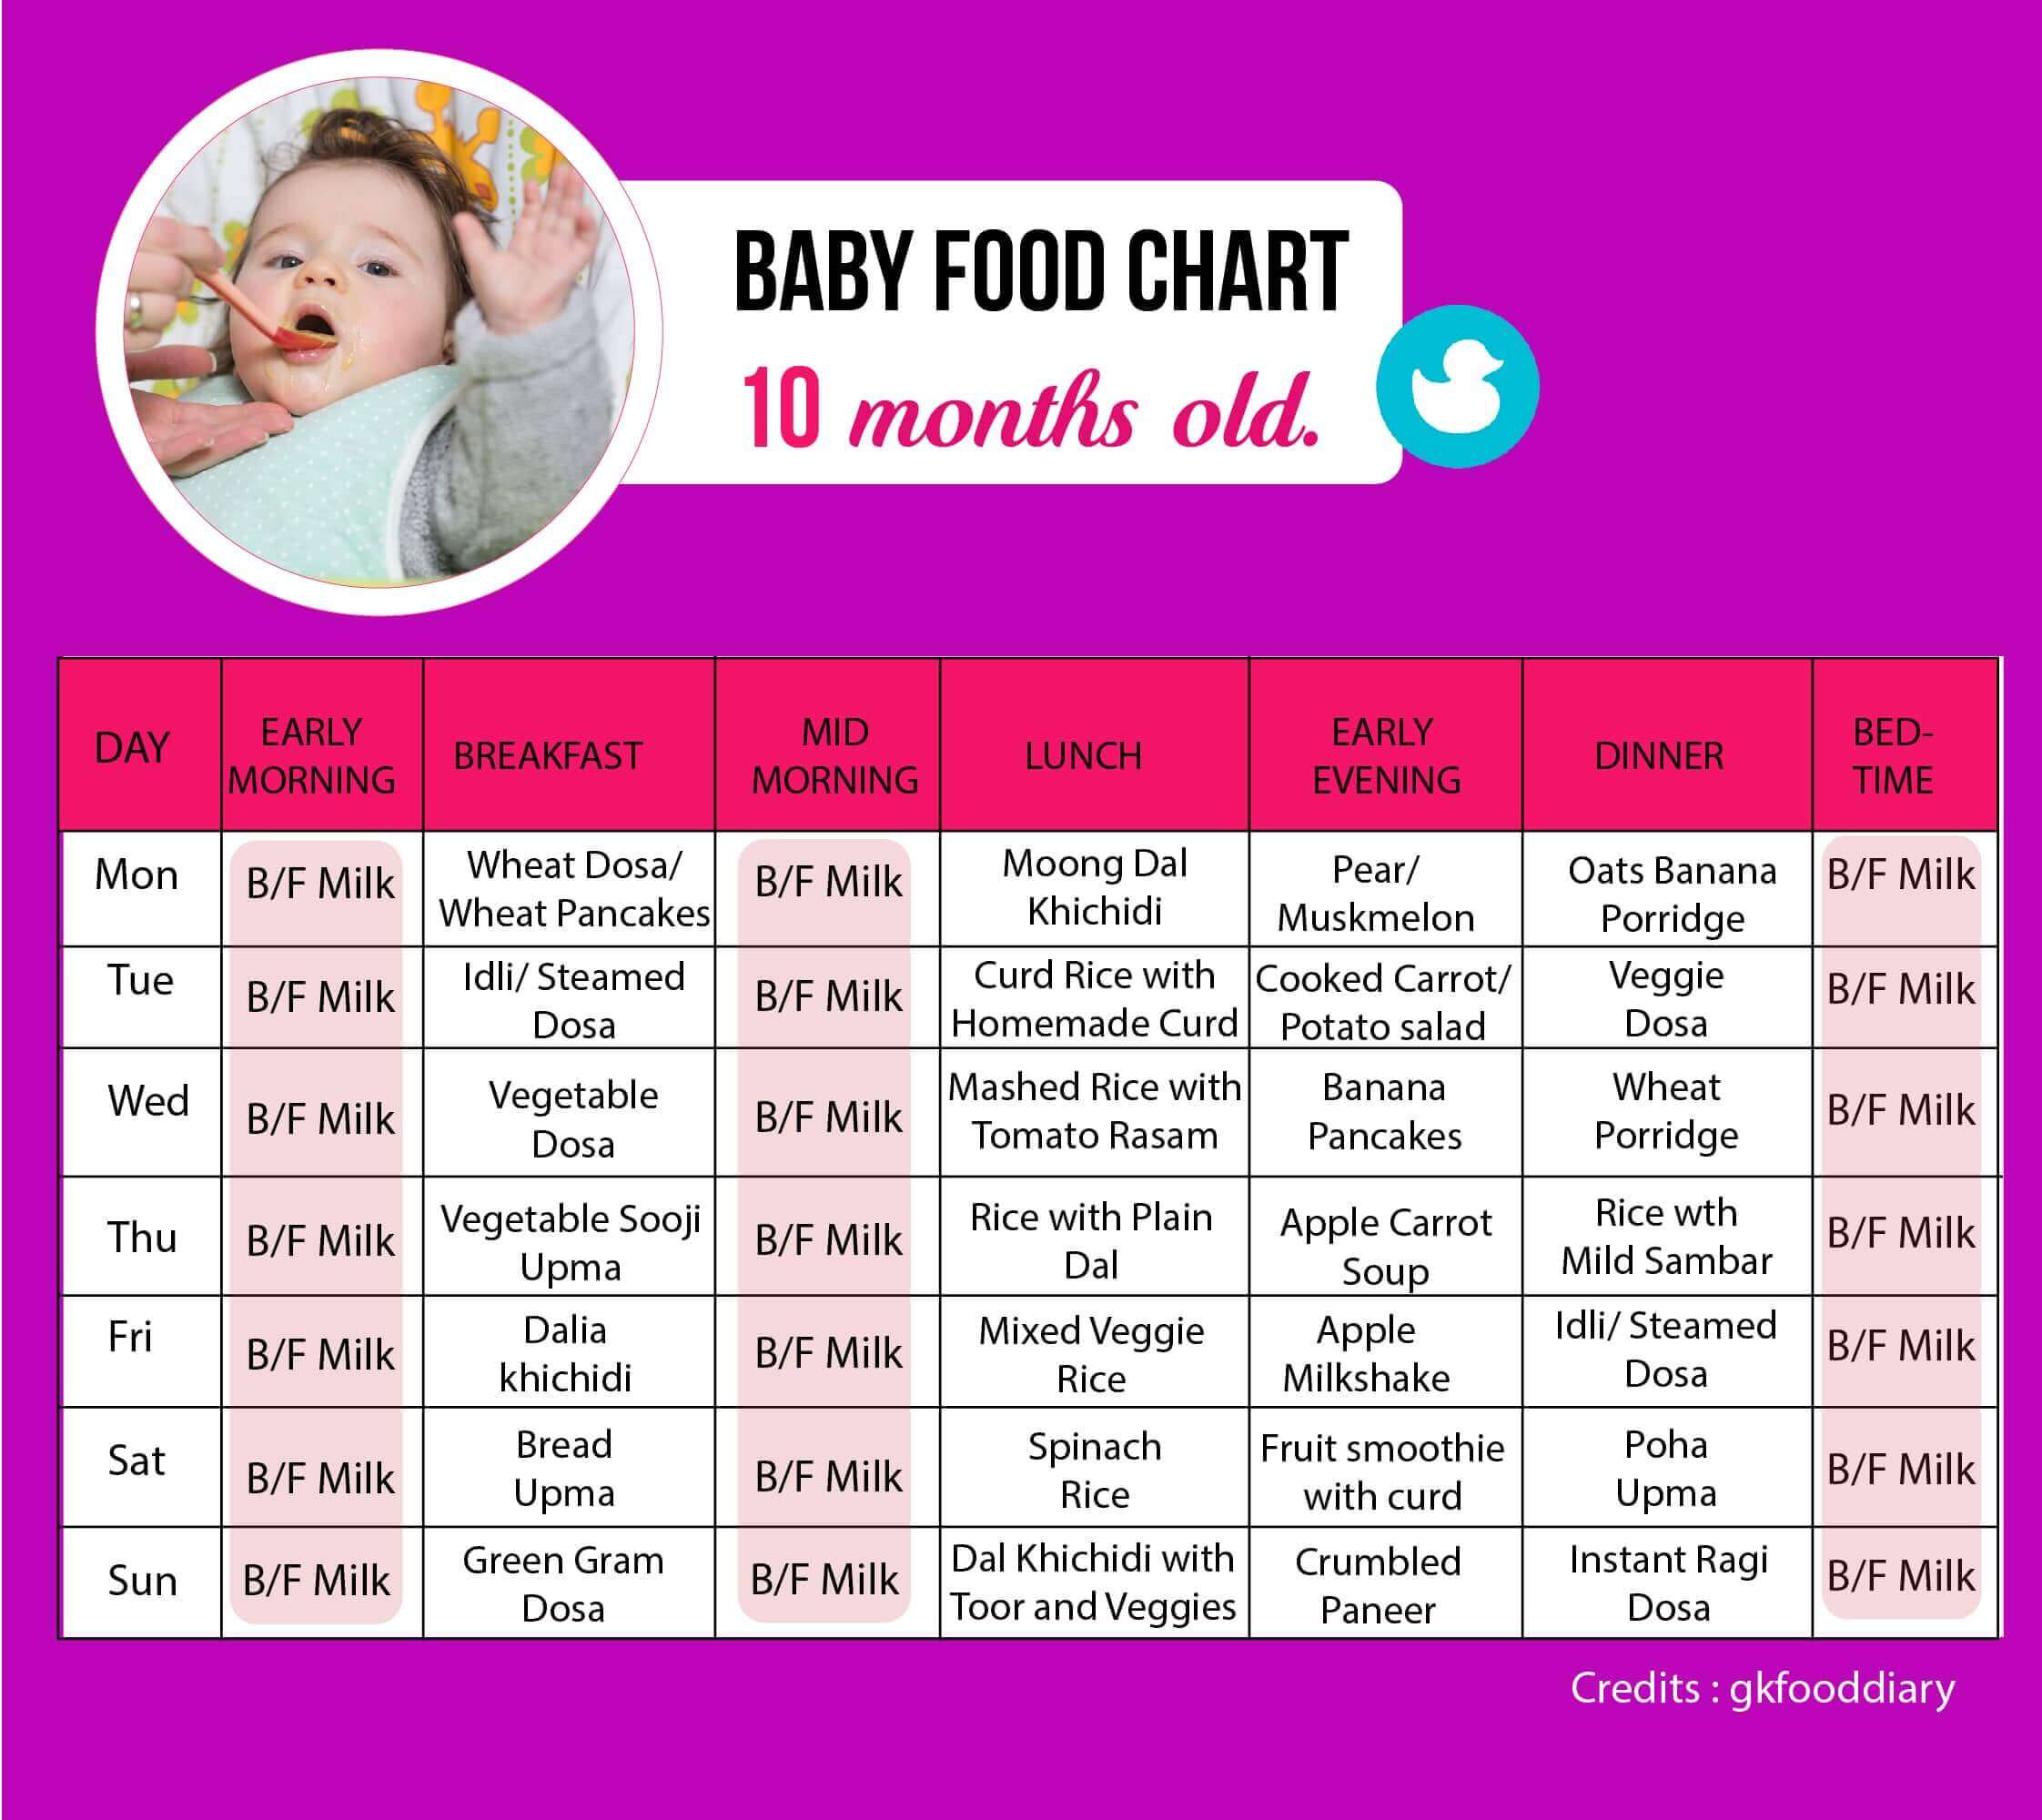 Food Chart For A 10 Month Old Baby